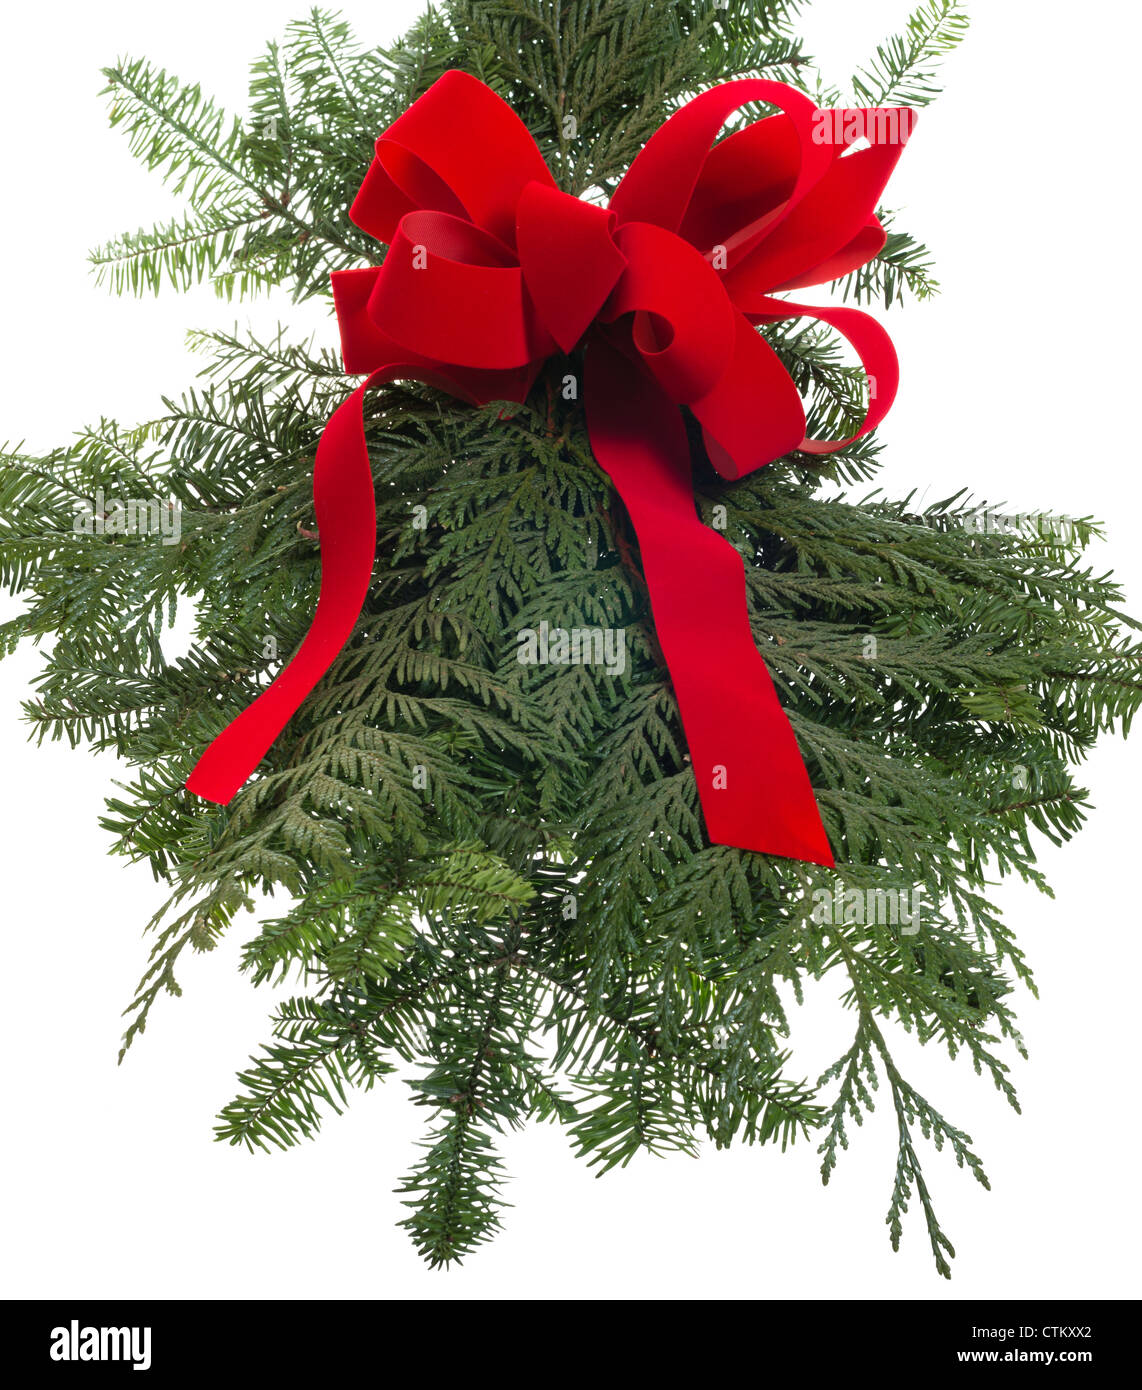 Christmas decoration of live greens with a red bow Stock Photo